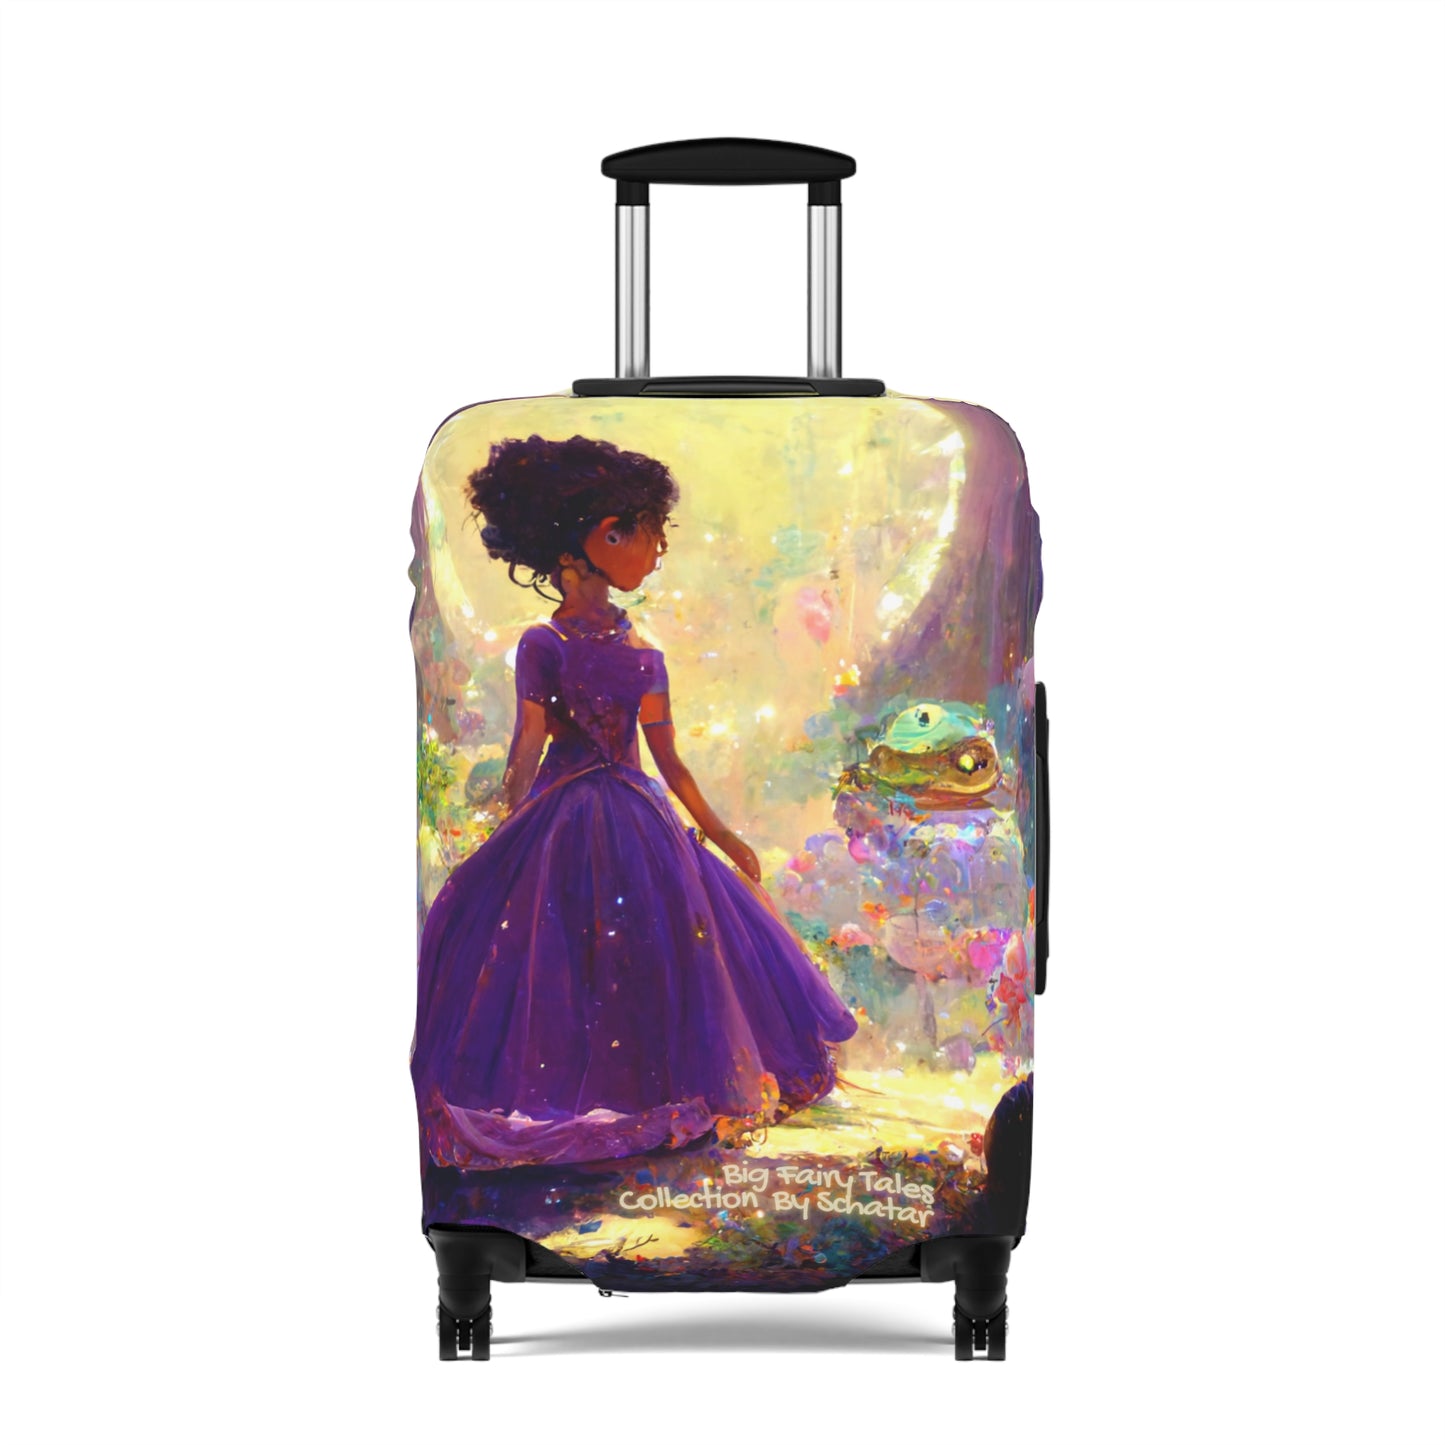 Big Fairy Tales By Schatar Princess And The Frog Prince Luggage Cover